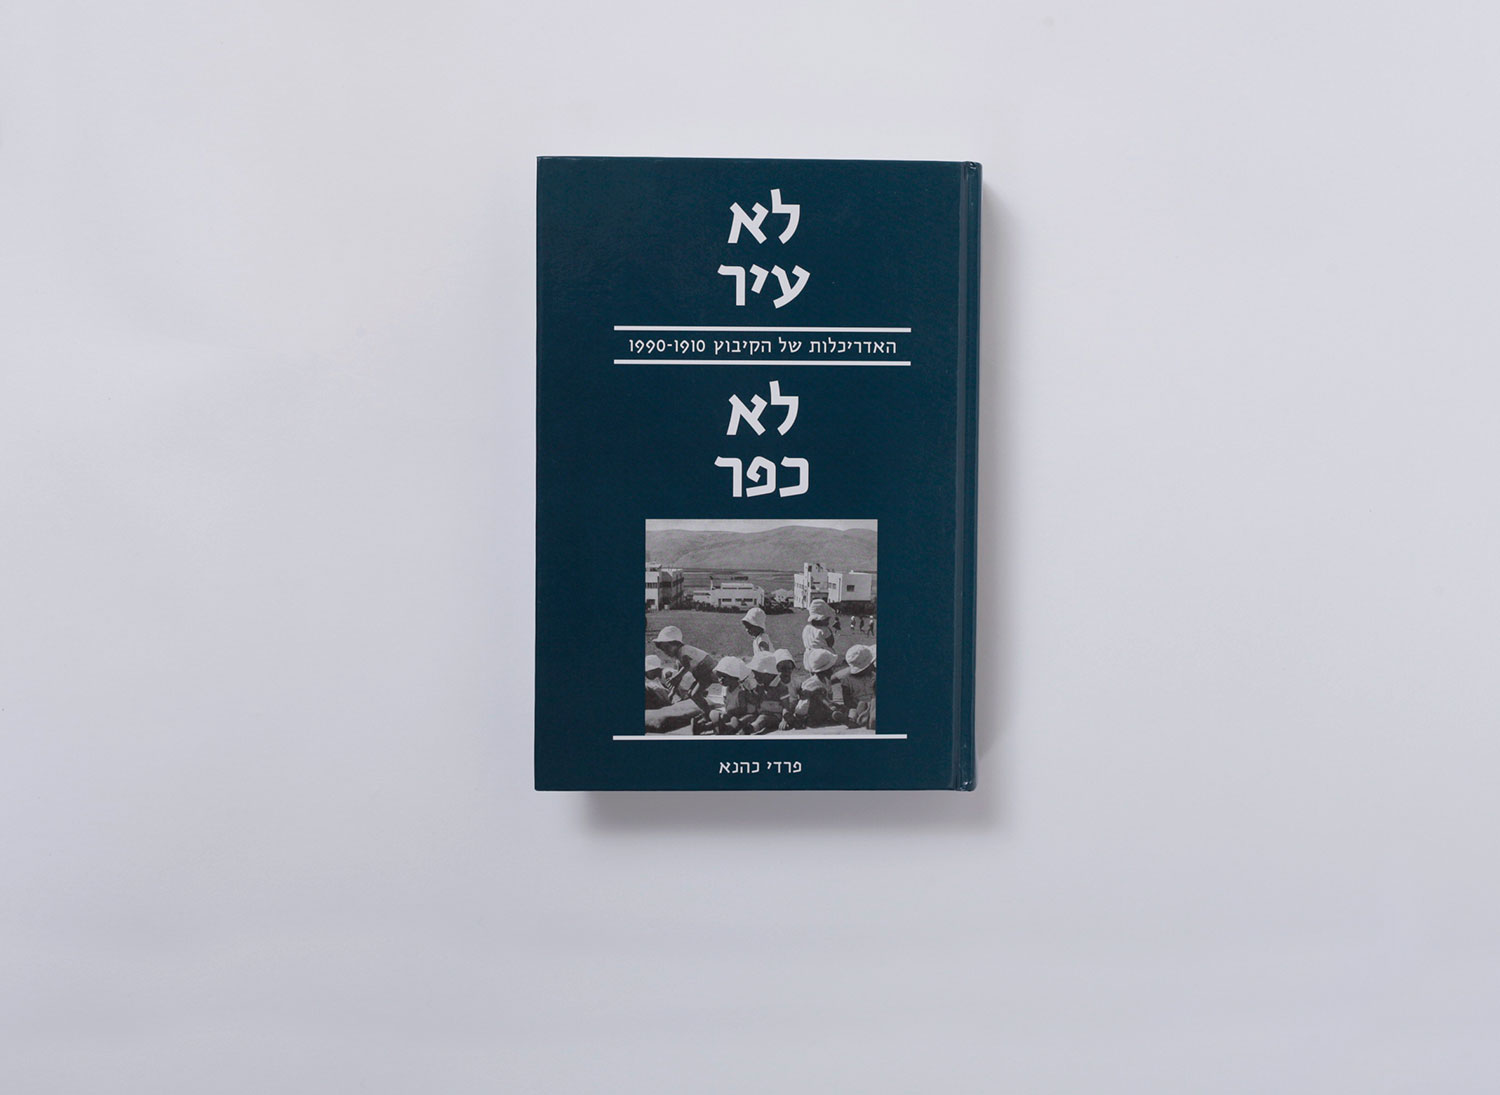 architecture of the Kibbutz Book No Vilage or Town